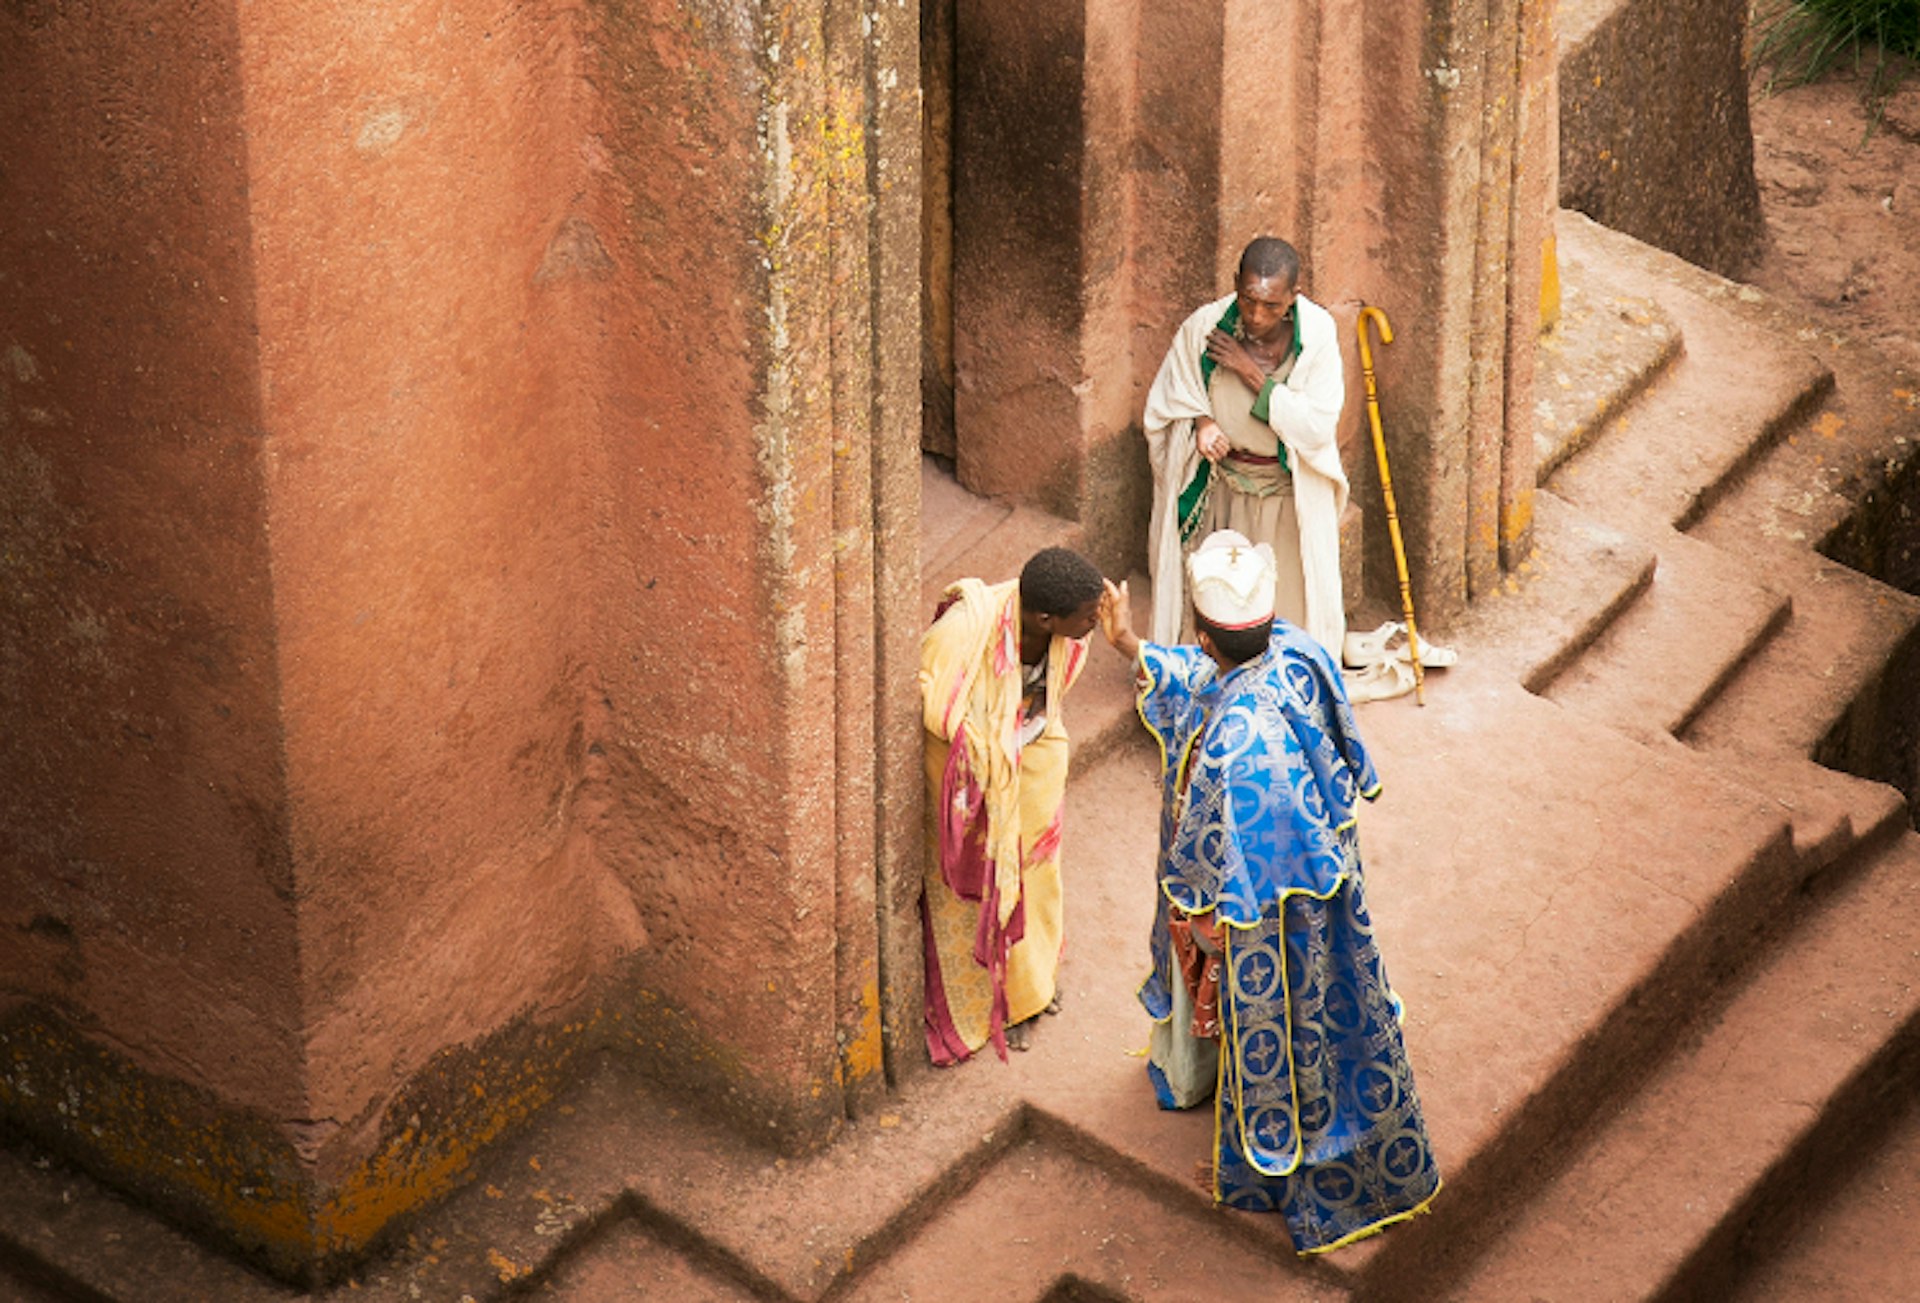 A priest blesses pilgrims outside the entrance to Bet Giyorgis. Image by Philip Lee Harvey / Lonely Planet